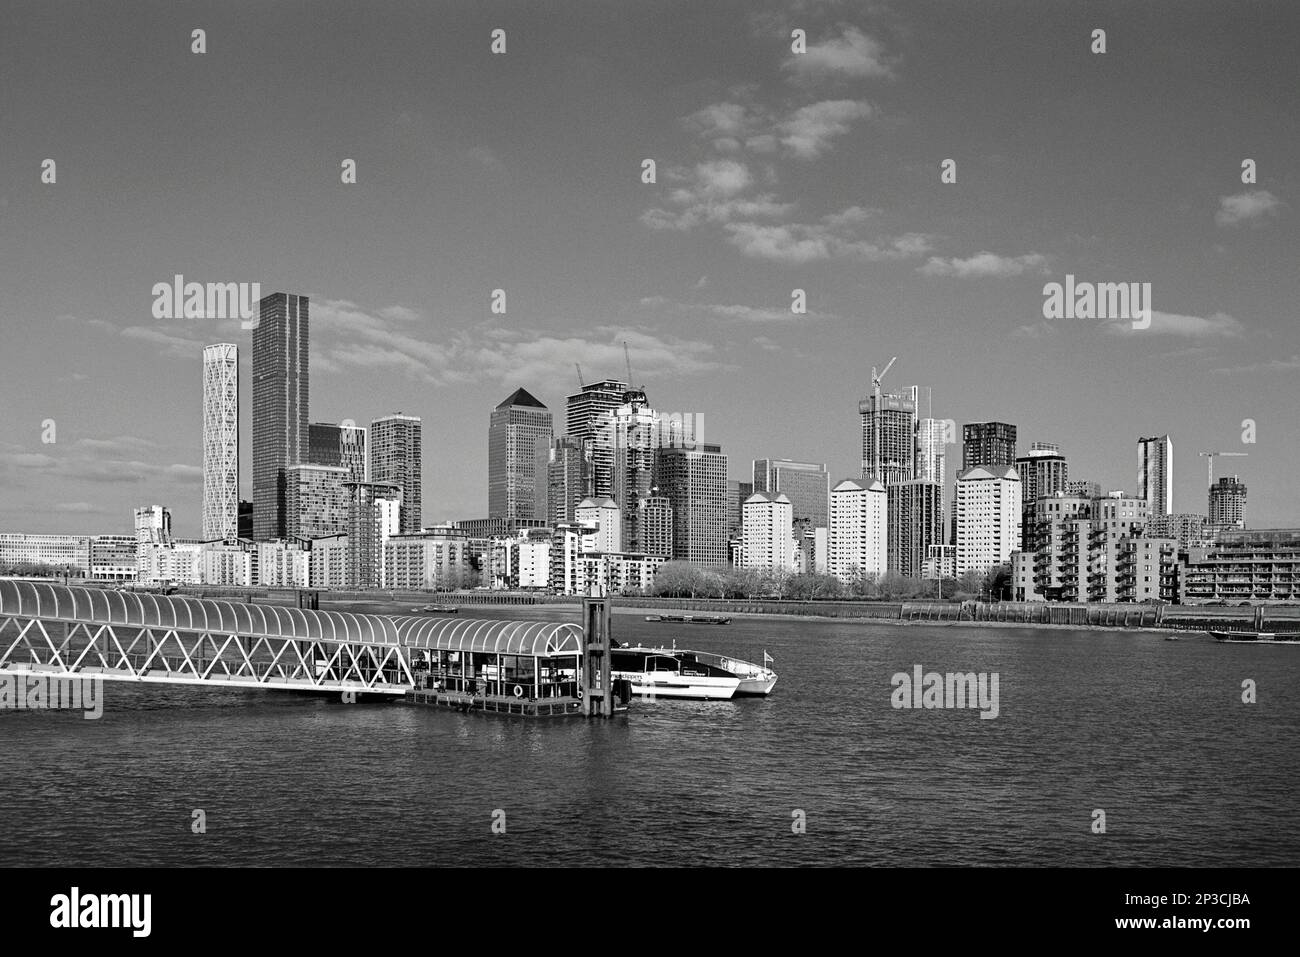 Greenland Surrey Quays Pier and Canary Wharf on the River Thames, South East London, UK Stock Photo